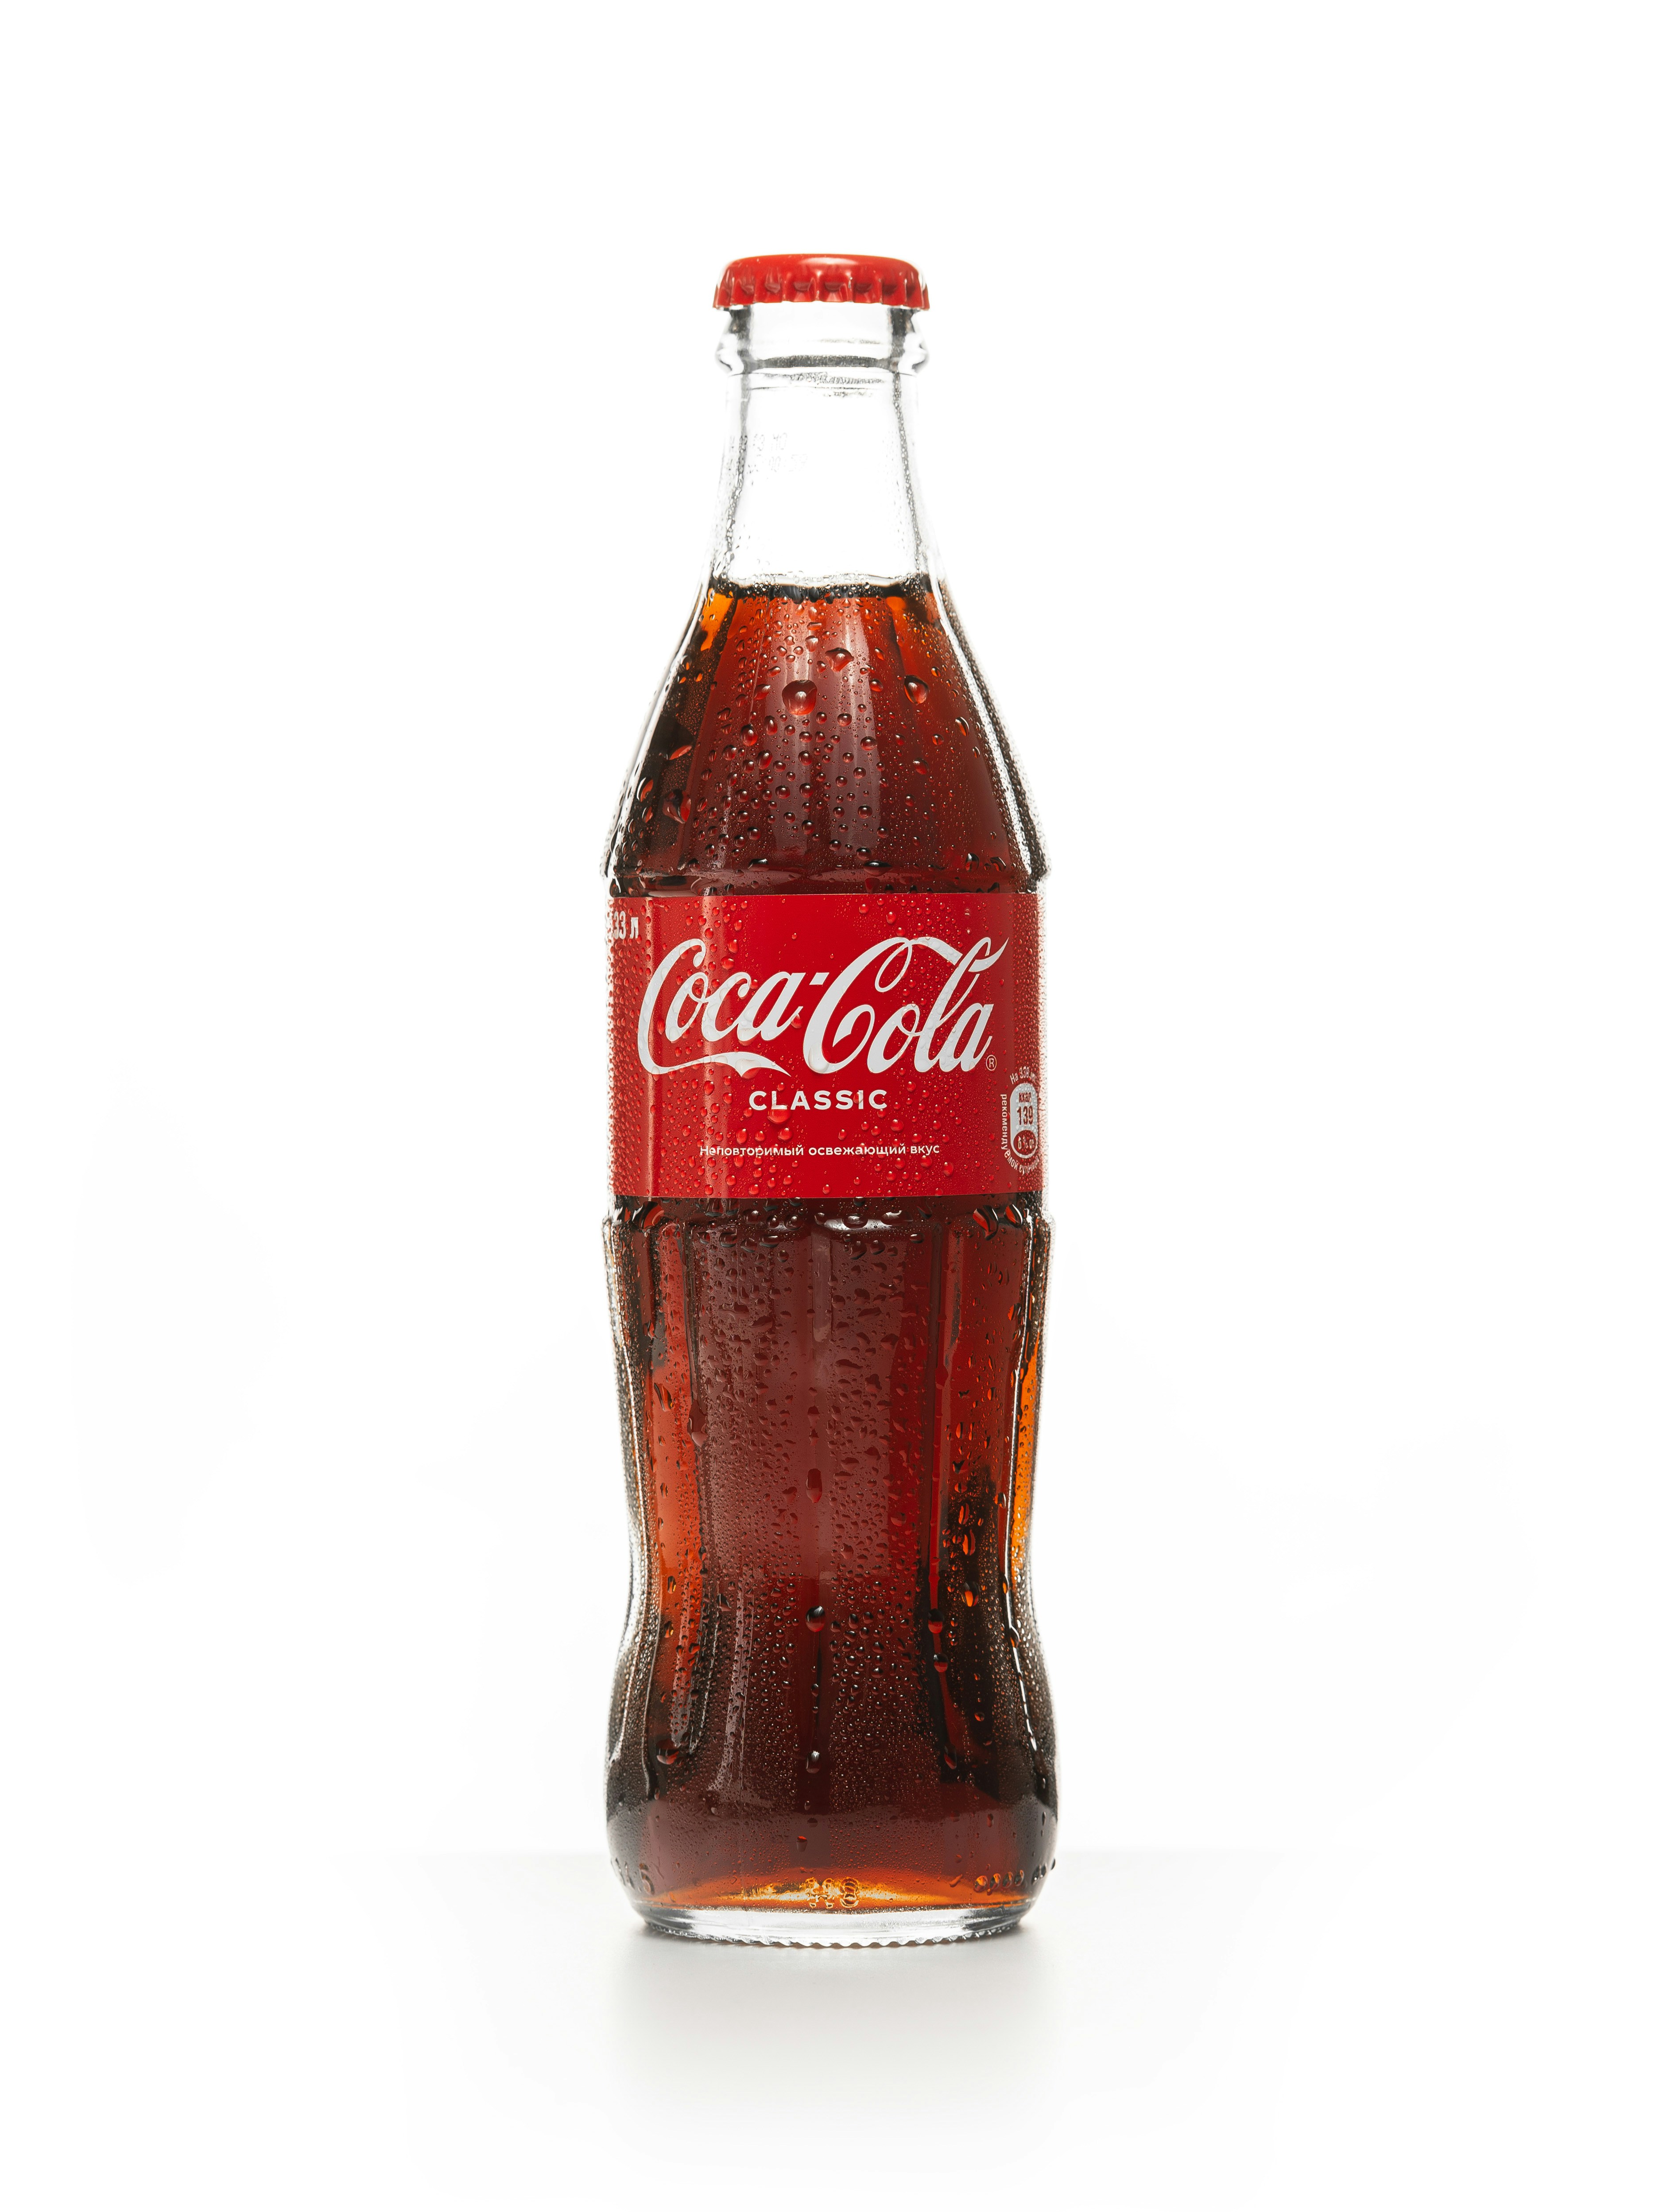 Can Diet Soda Cause Kidney Stones